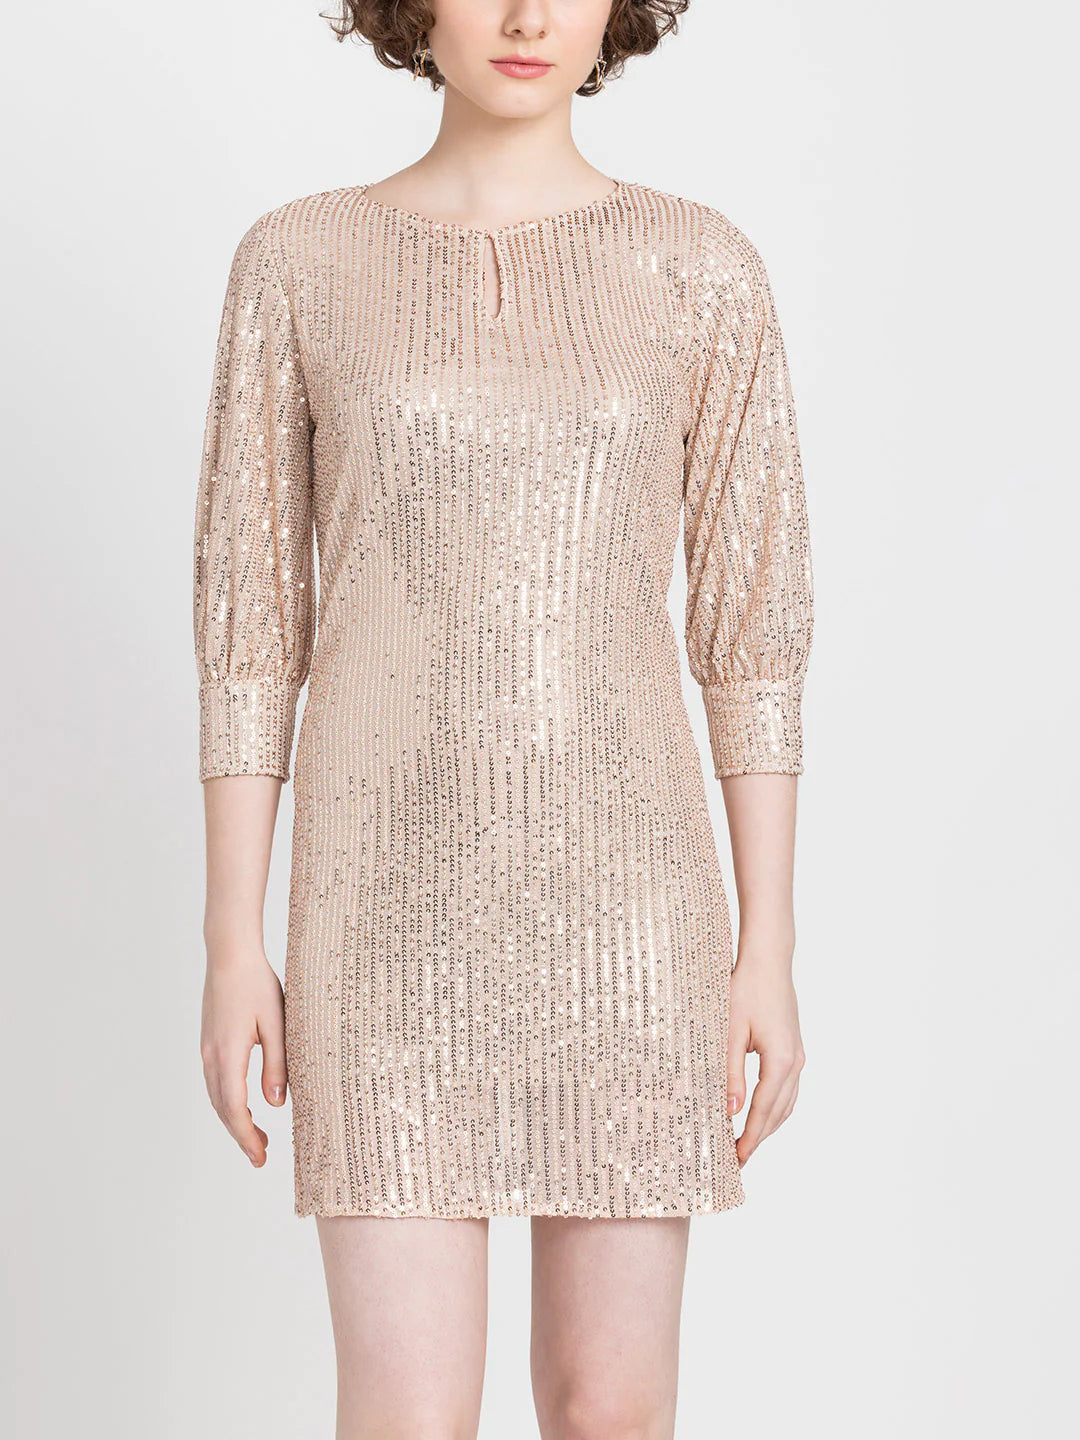 Pink Sparkle Party Dress | Pink Sparkle Bell-Sleeve Party Dress